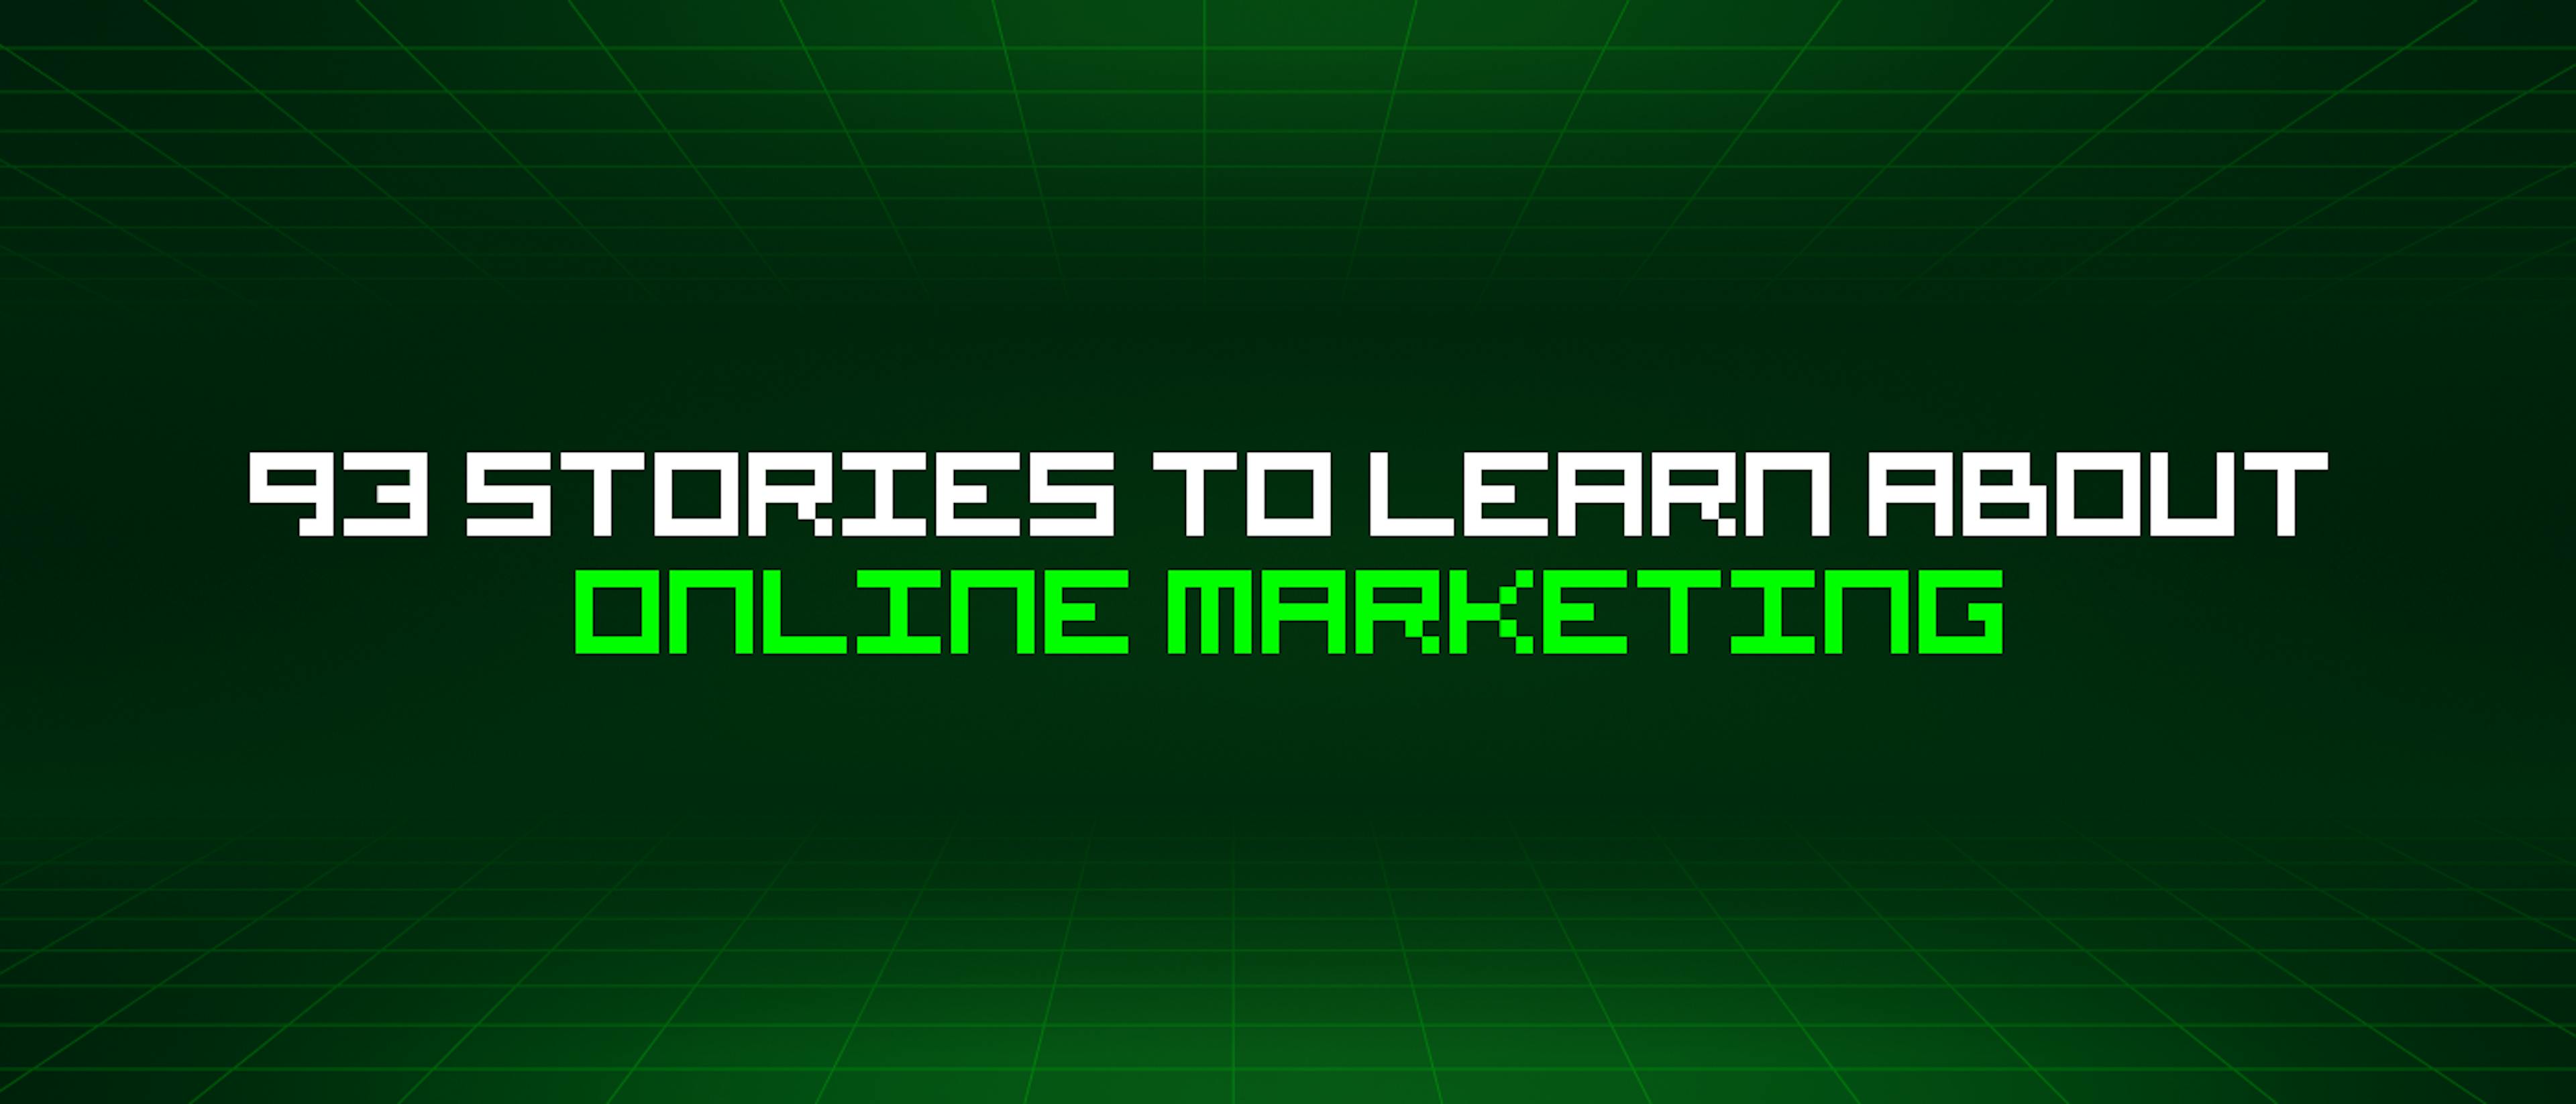 featured image - 93 Stories To Learn About Online Marketing